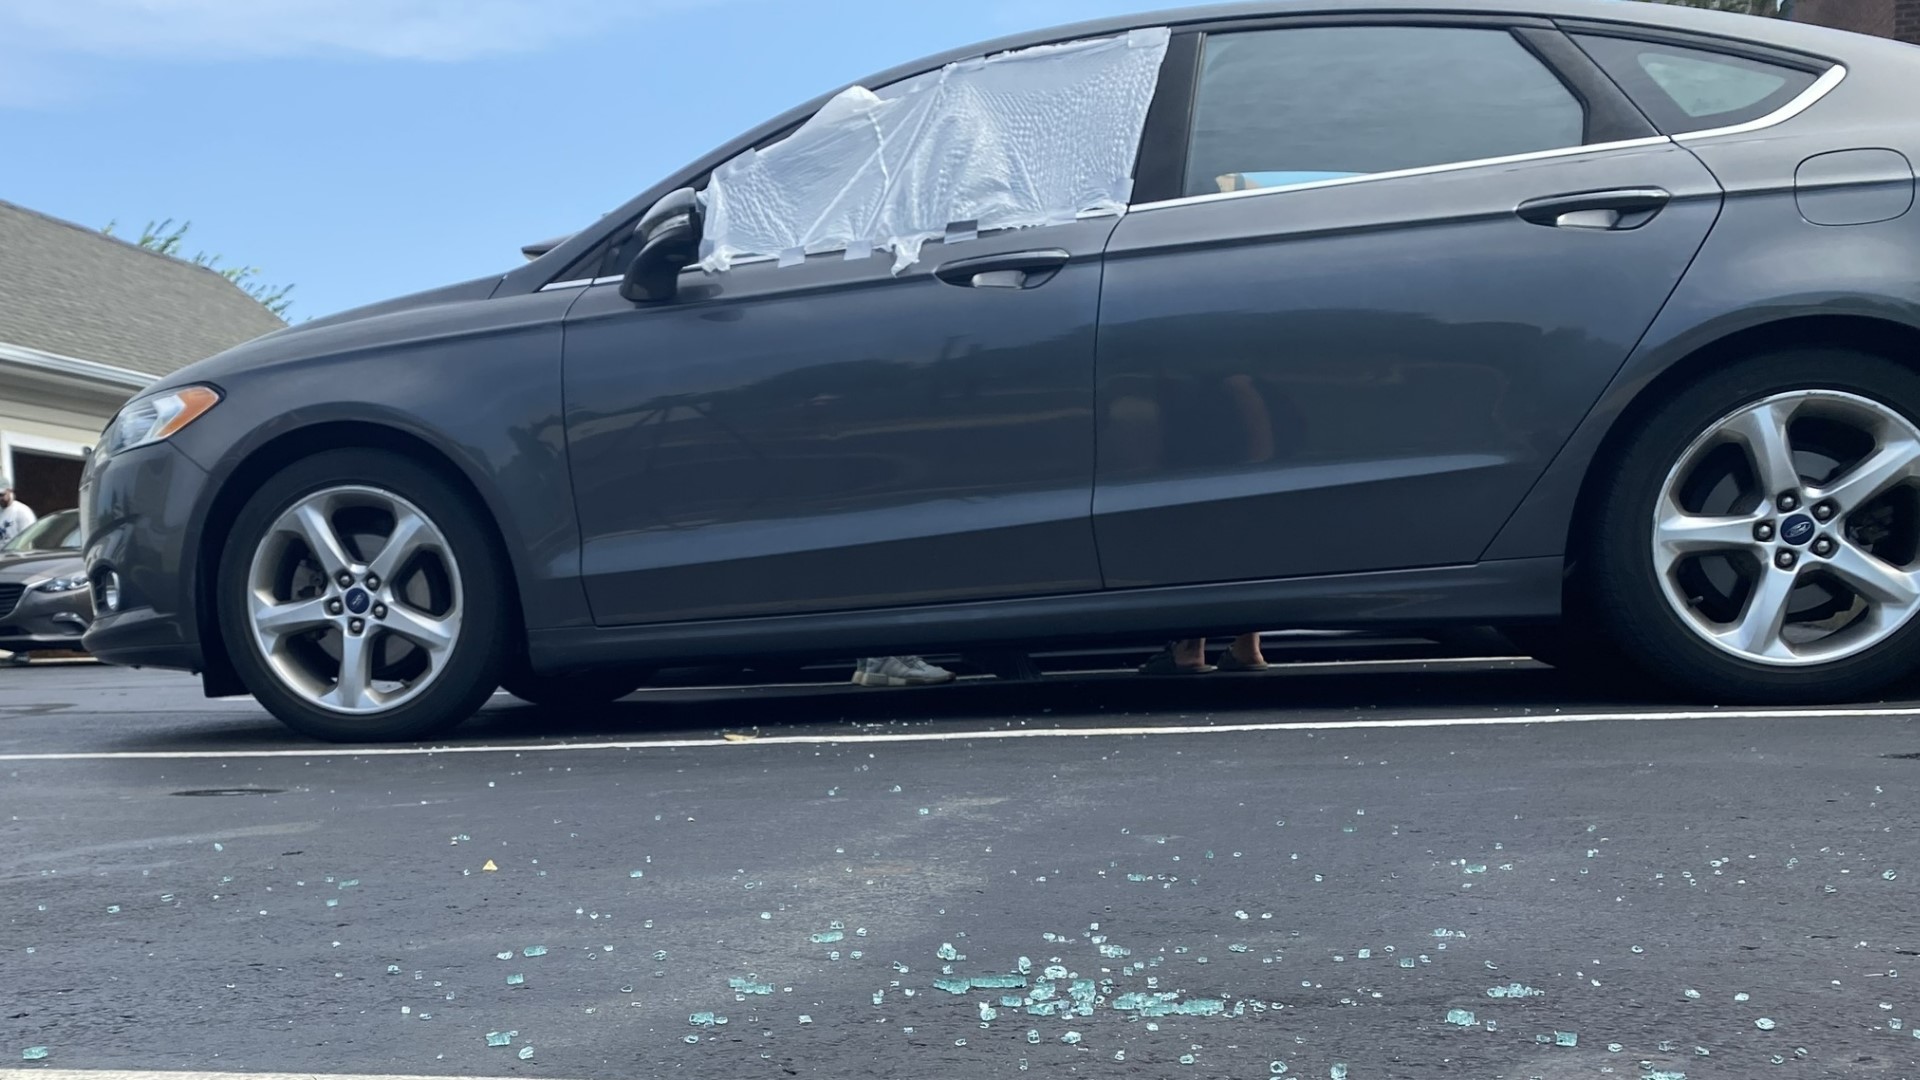 The Columbus Division of Police is investigating multiple reports of vehicles being broken into across the city on Tuesday.